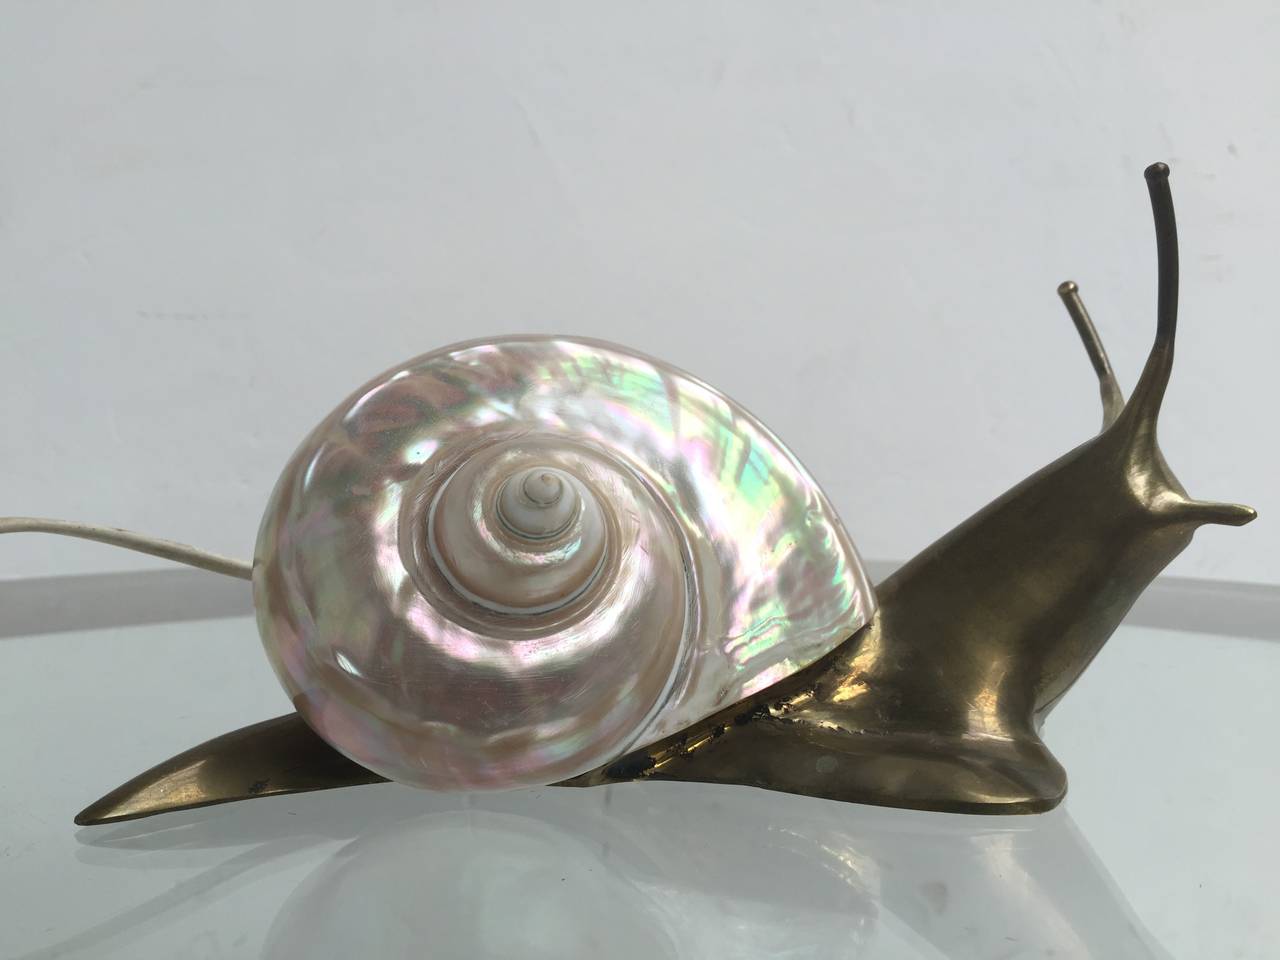 Truly beautiful  1950s French artist's  'escargot'  light sculpture made of cast bronze with a stunning handworked mother of pearl shell  serving as the light  diffuser.  

The snail form  has become somewhat of an icon in post war modern art from